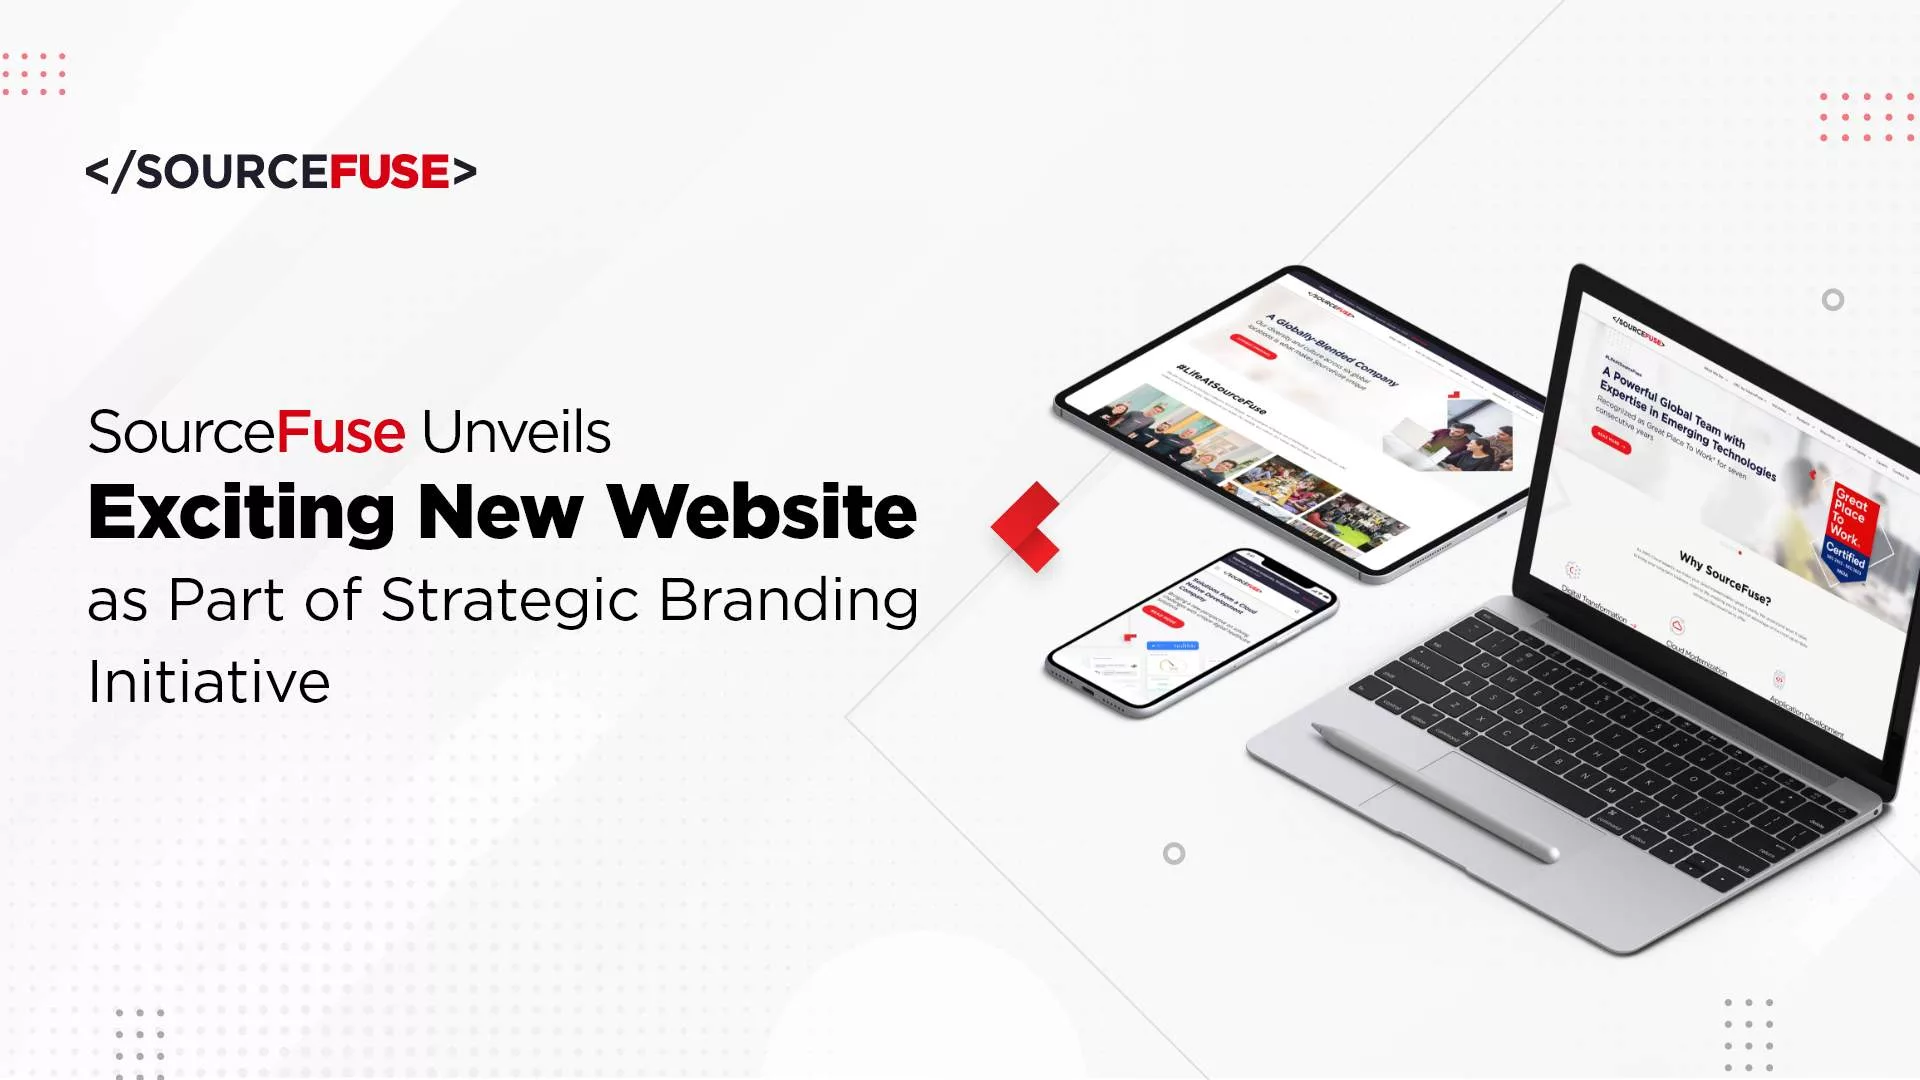 SourceFuse Unveils Exciting New Website as Part of Strategic Branding Initiative